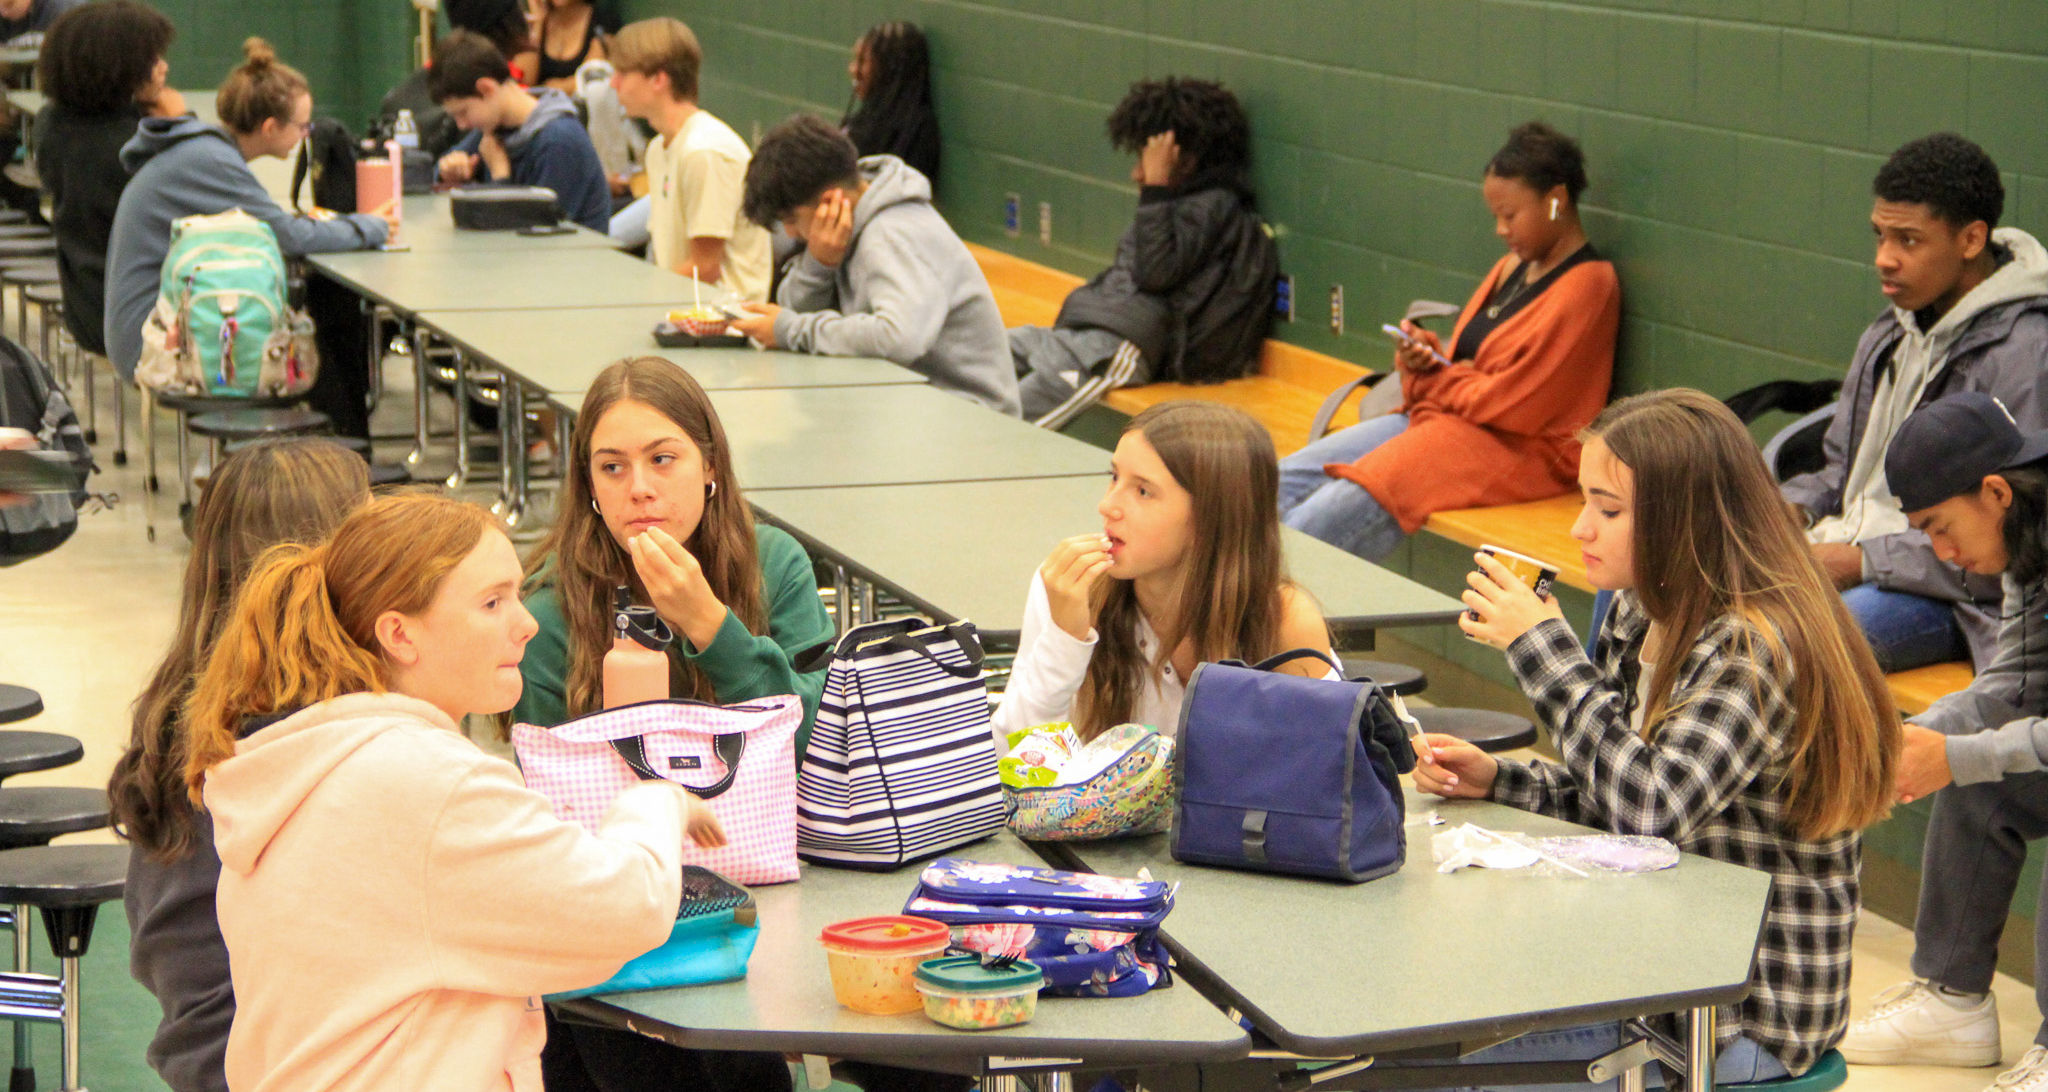 Students sitting down in the school cafeteria and eating their lunch